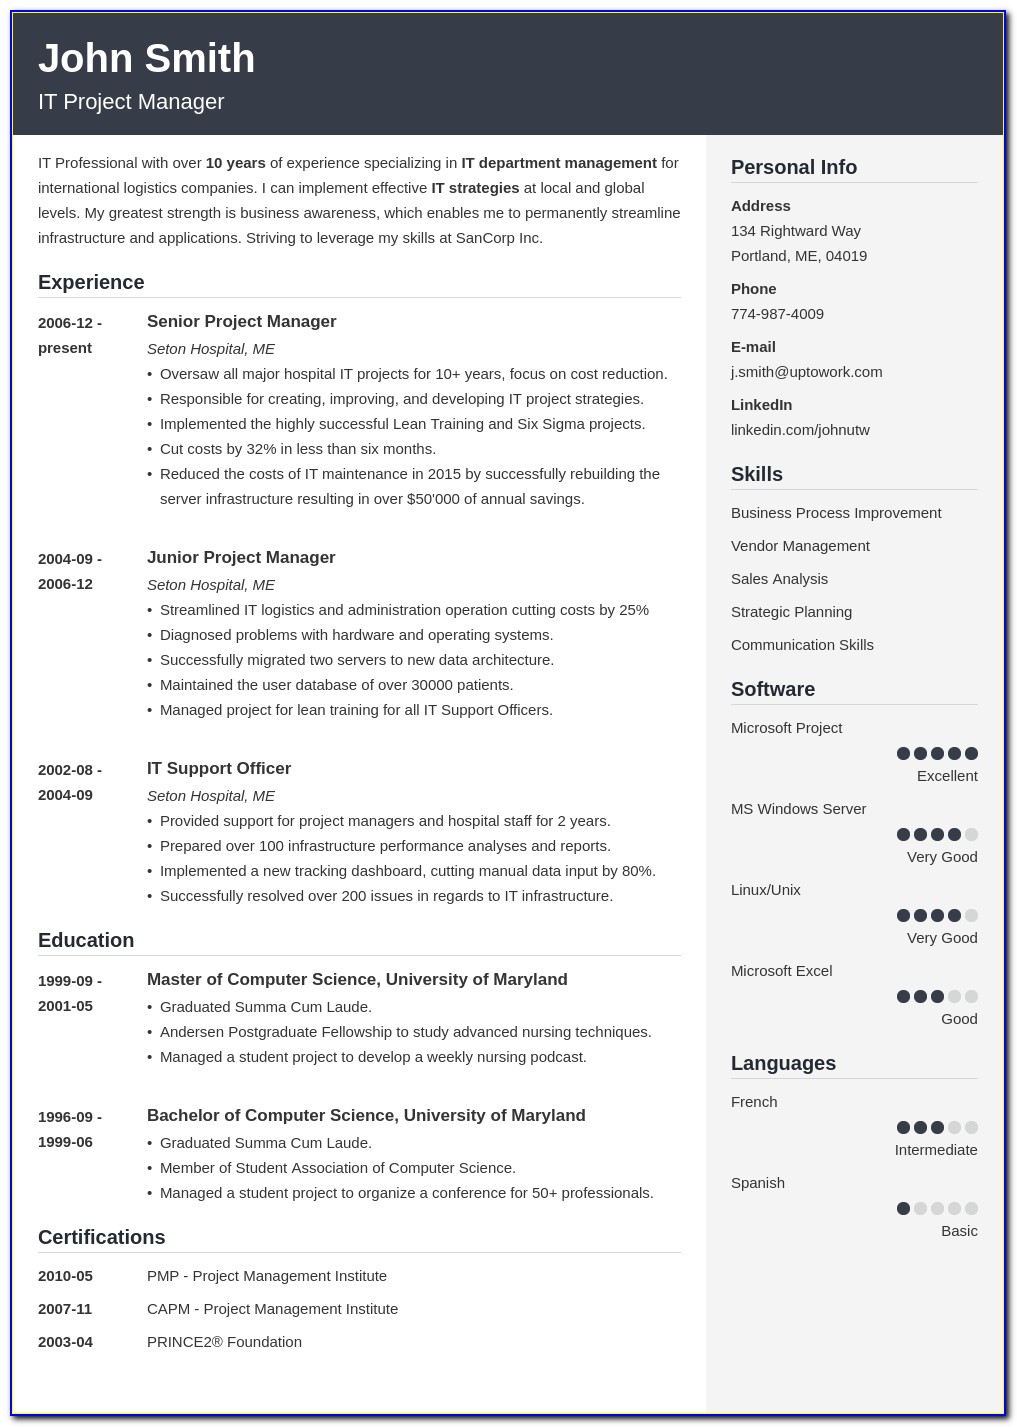 Professional Resume Services San Diego